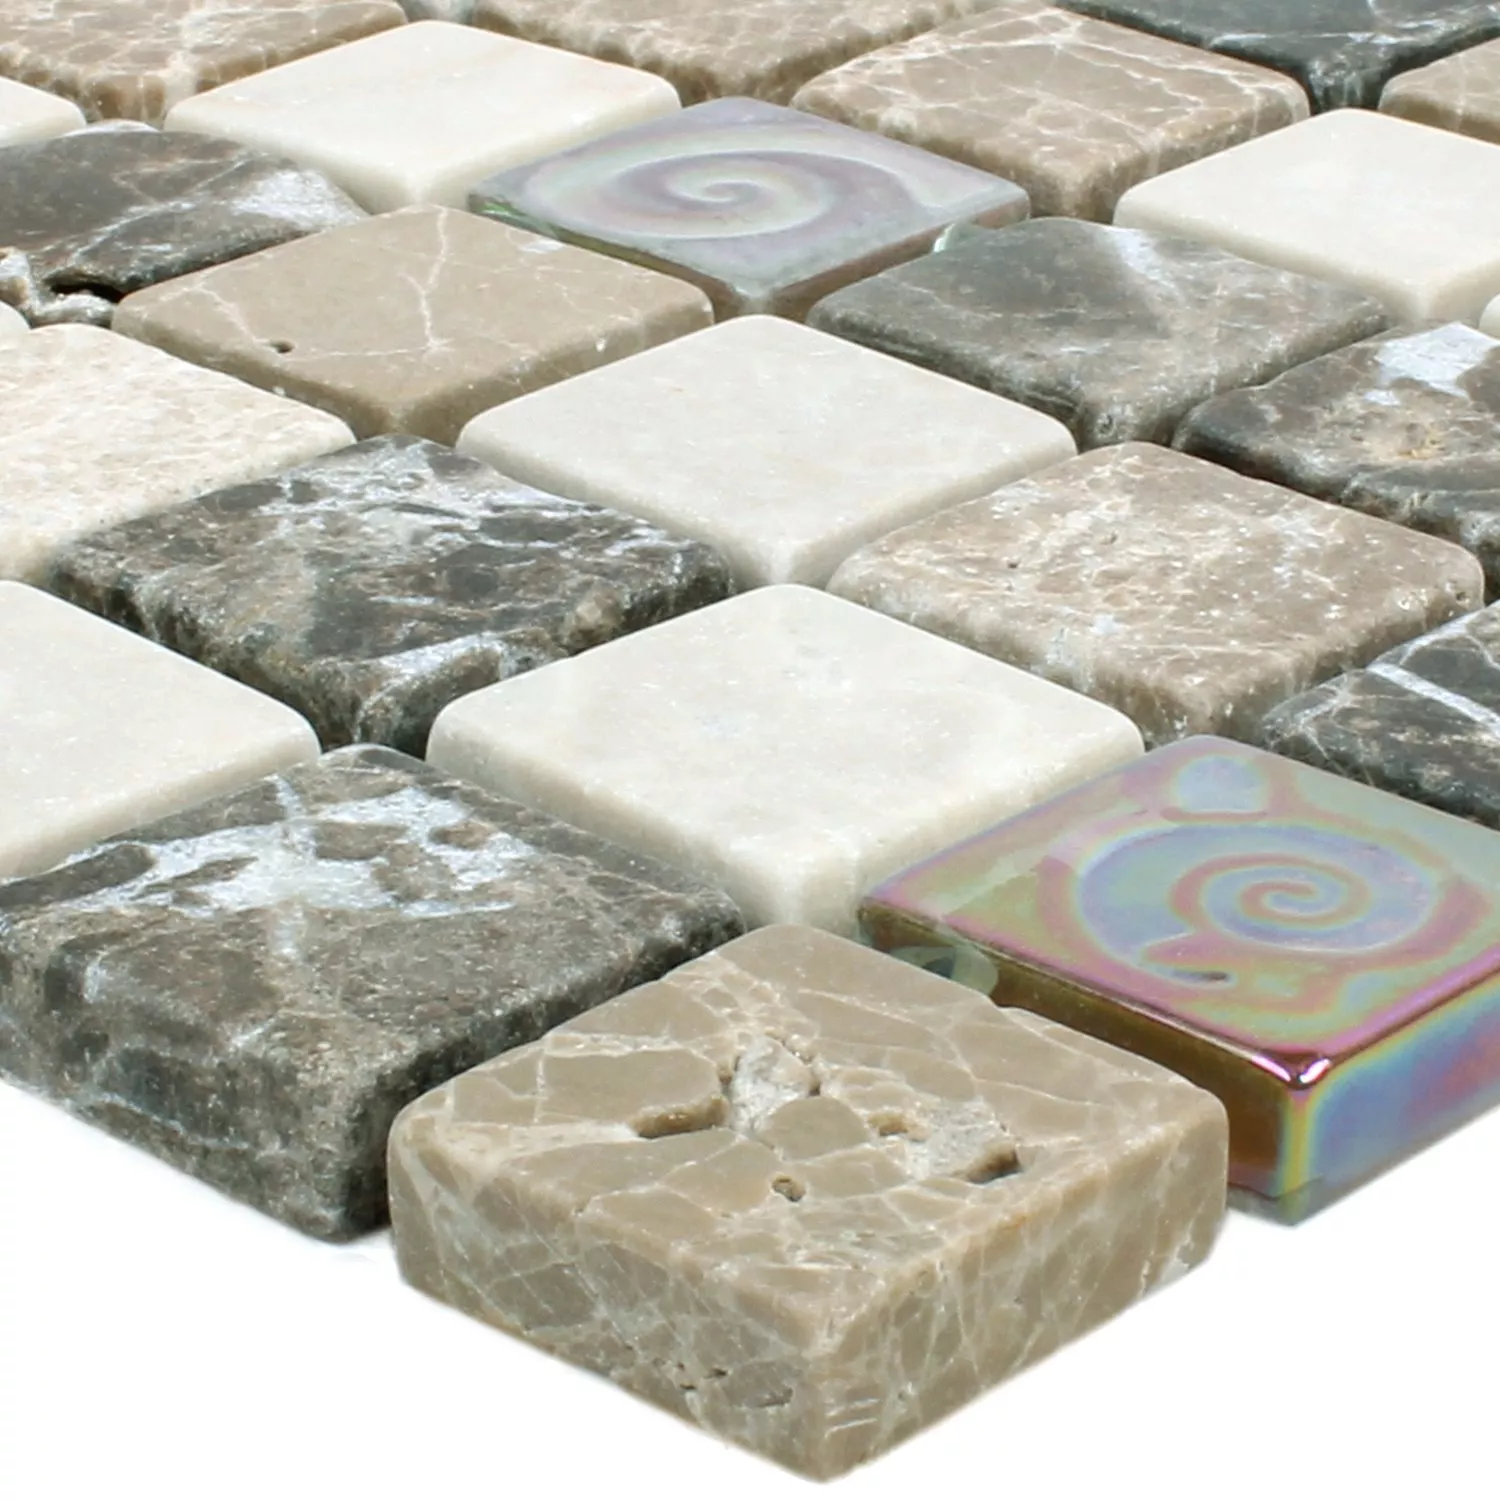 Mosaic Tiles Relief Marble Java Glass Mix Beige